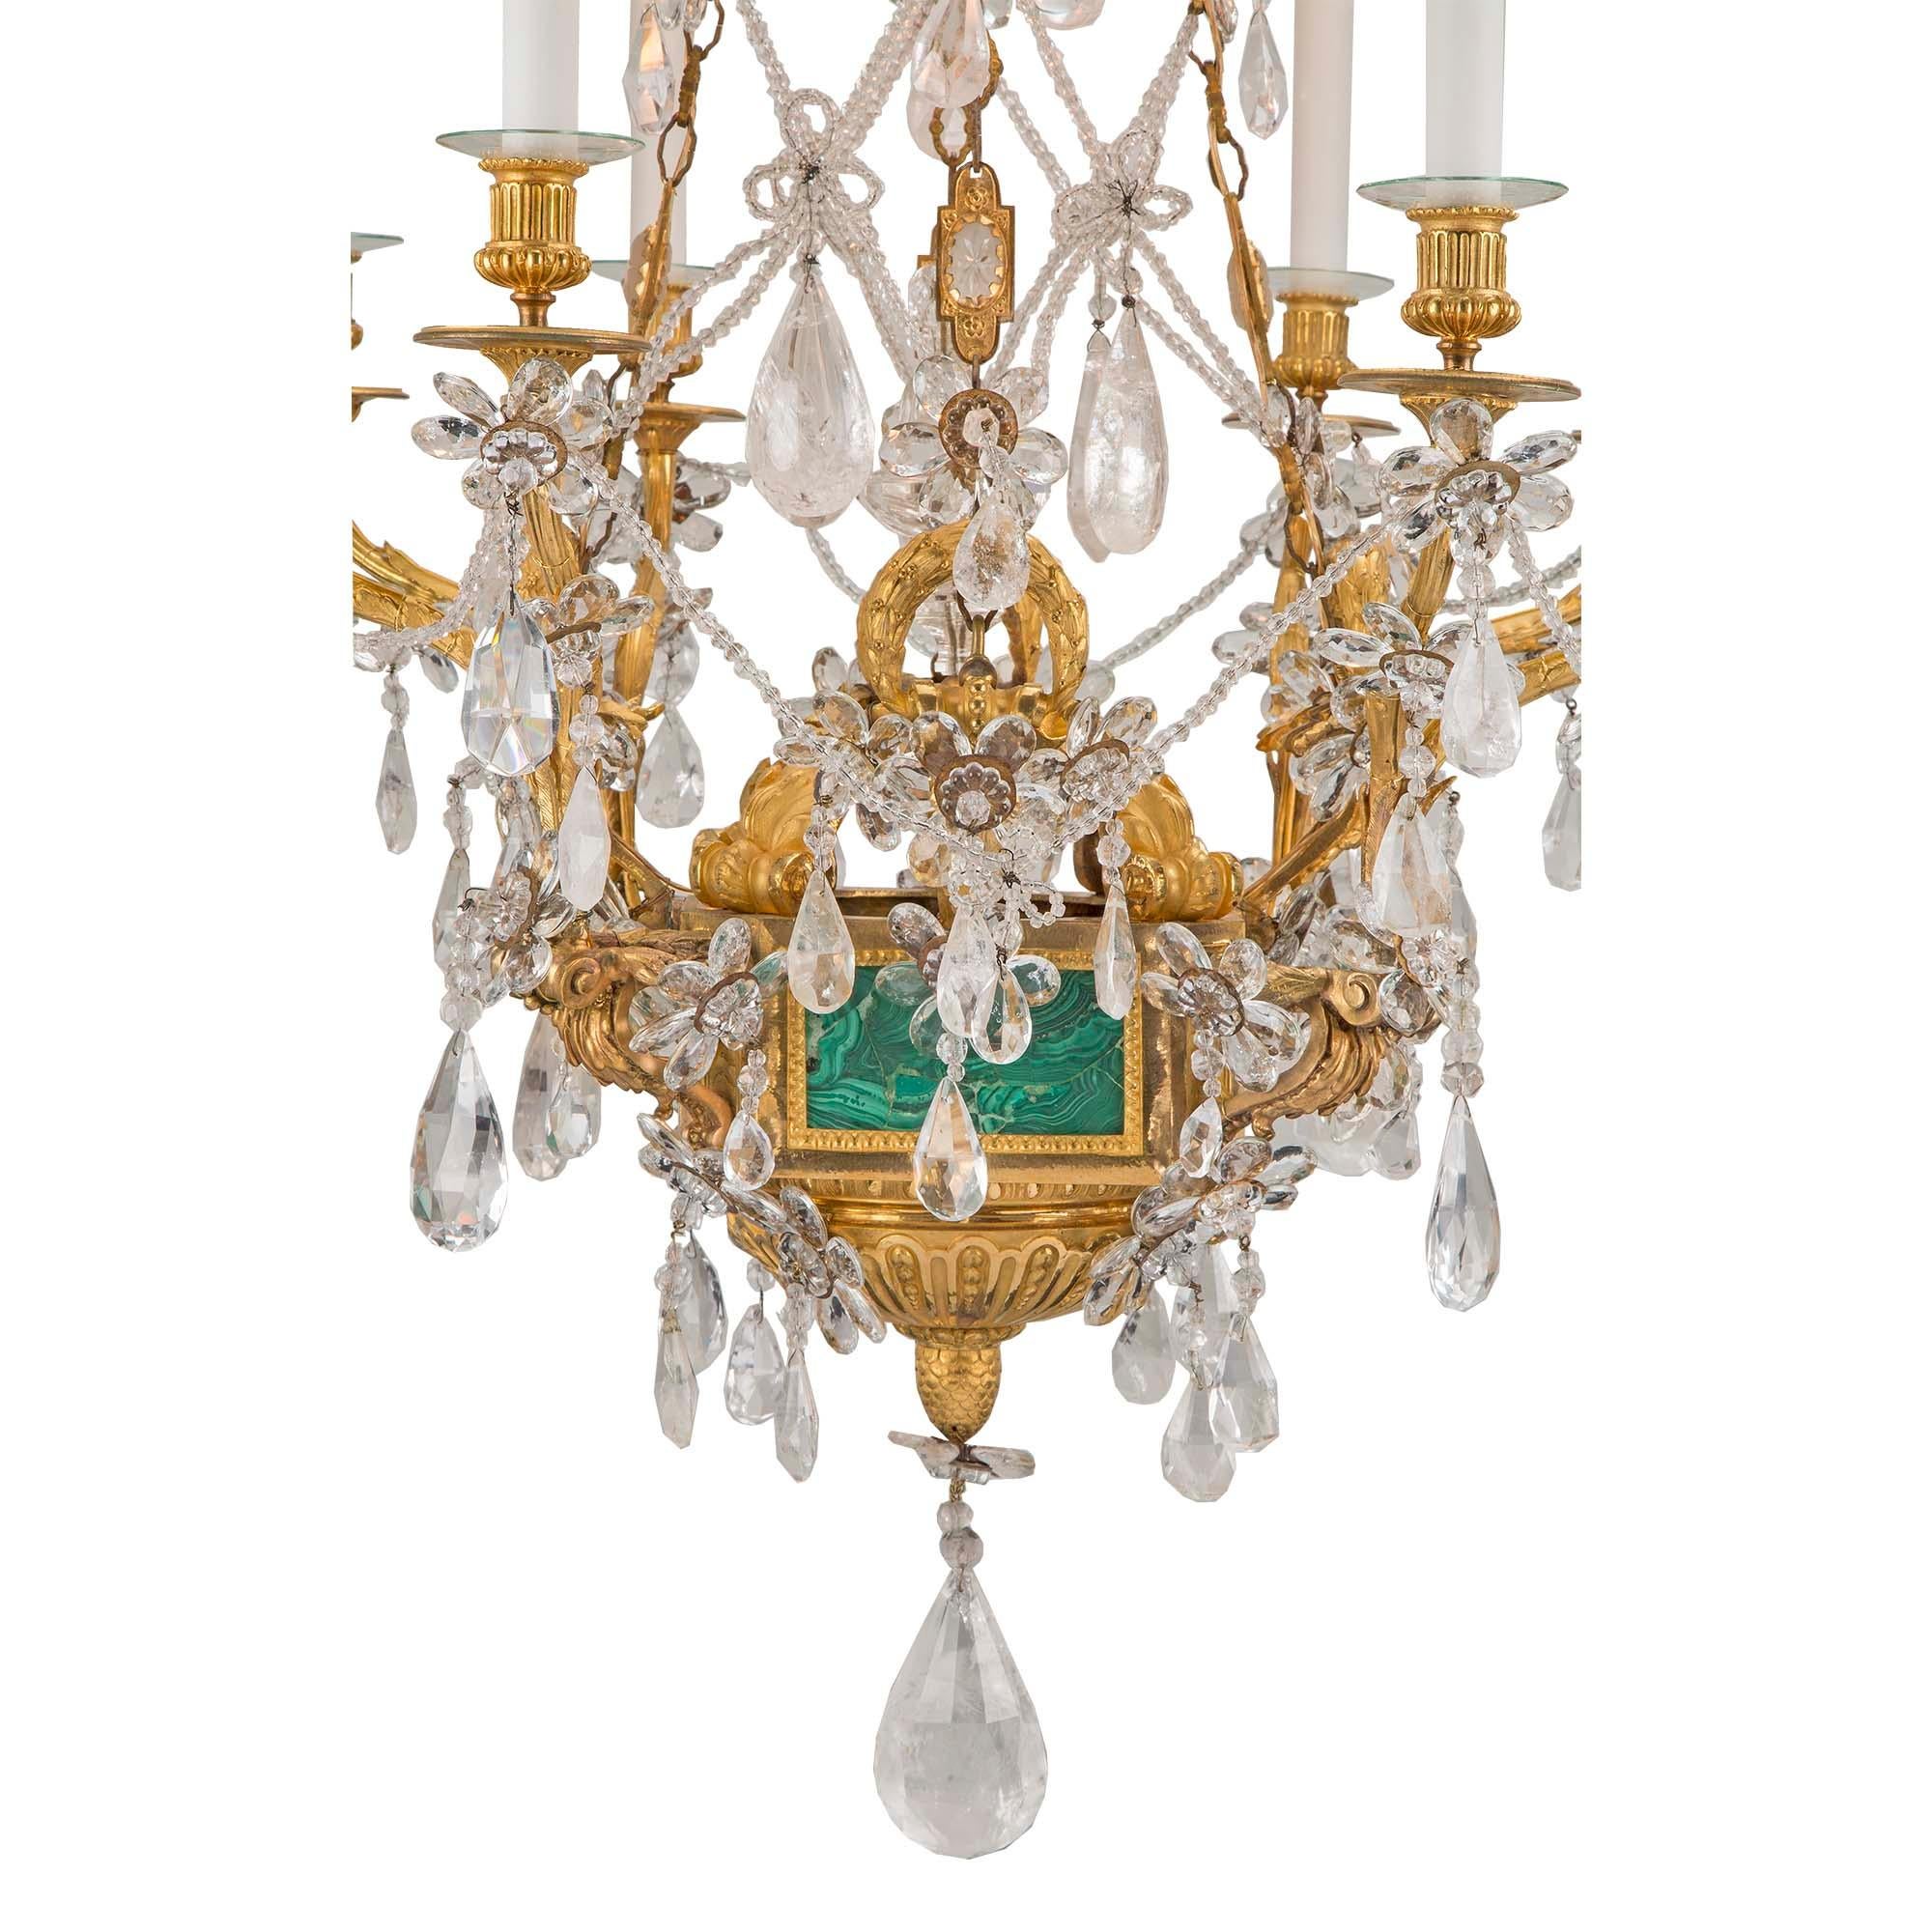  French Early 19th Century Louis XVI Style Eight-Arm Chandelier In Good Condition For Sale In West Palm Beach, FL